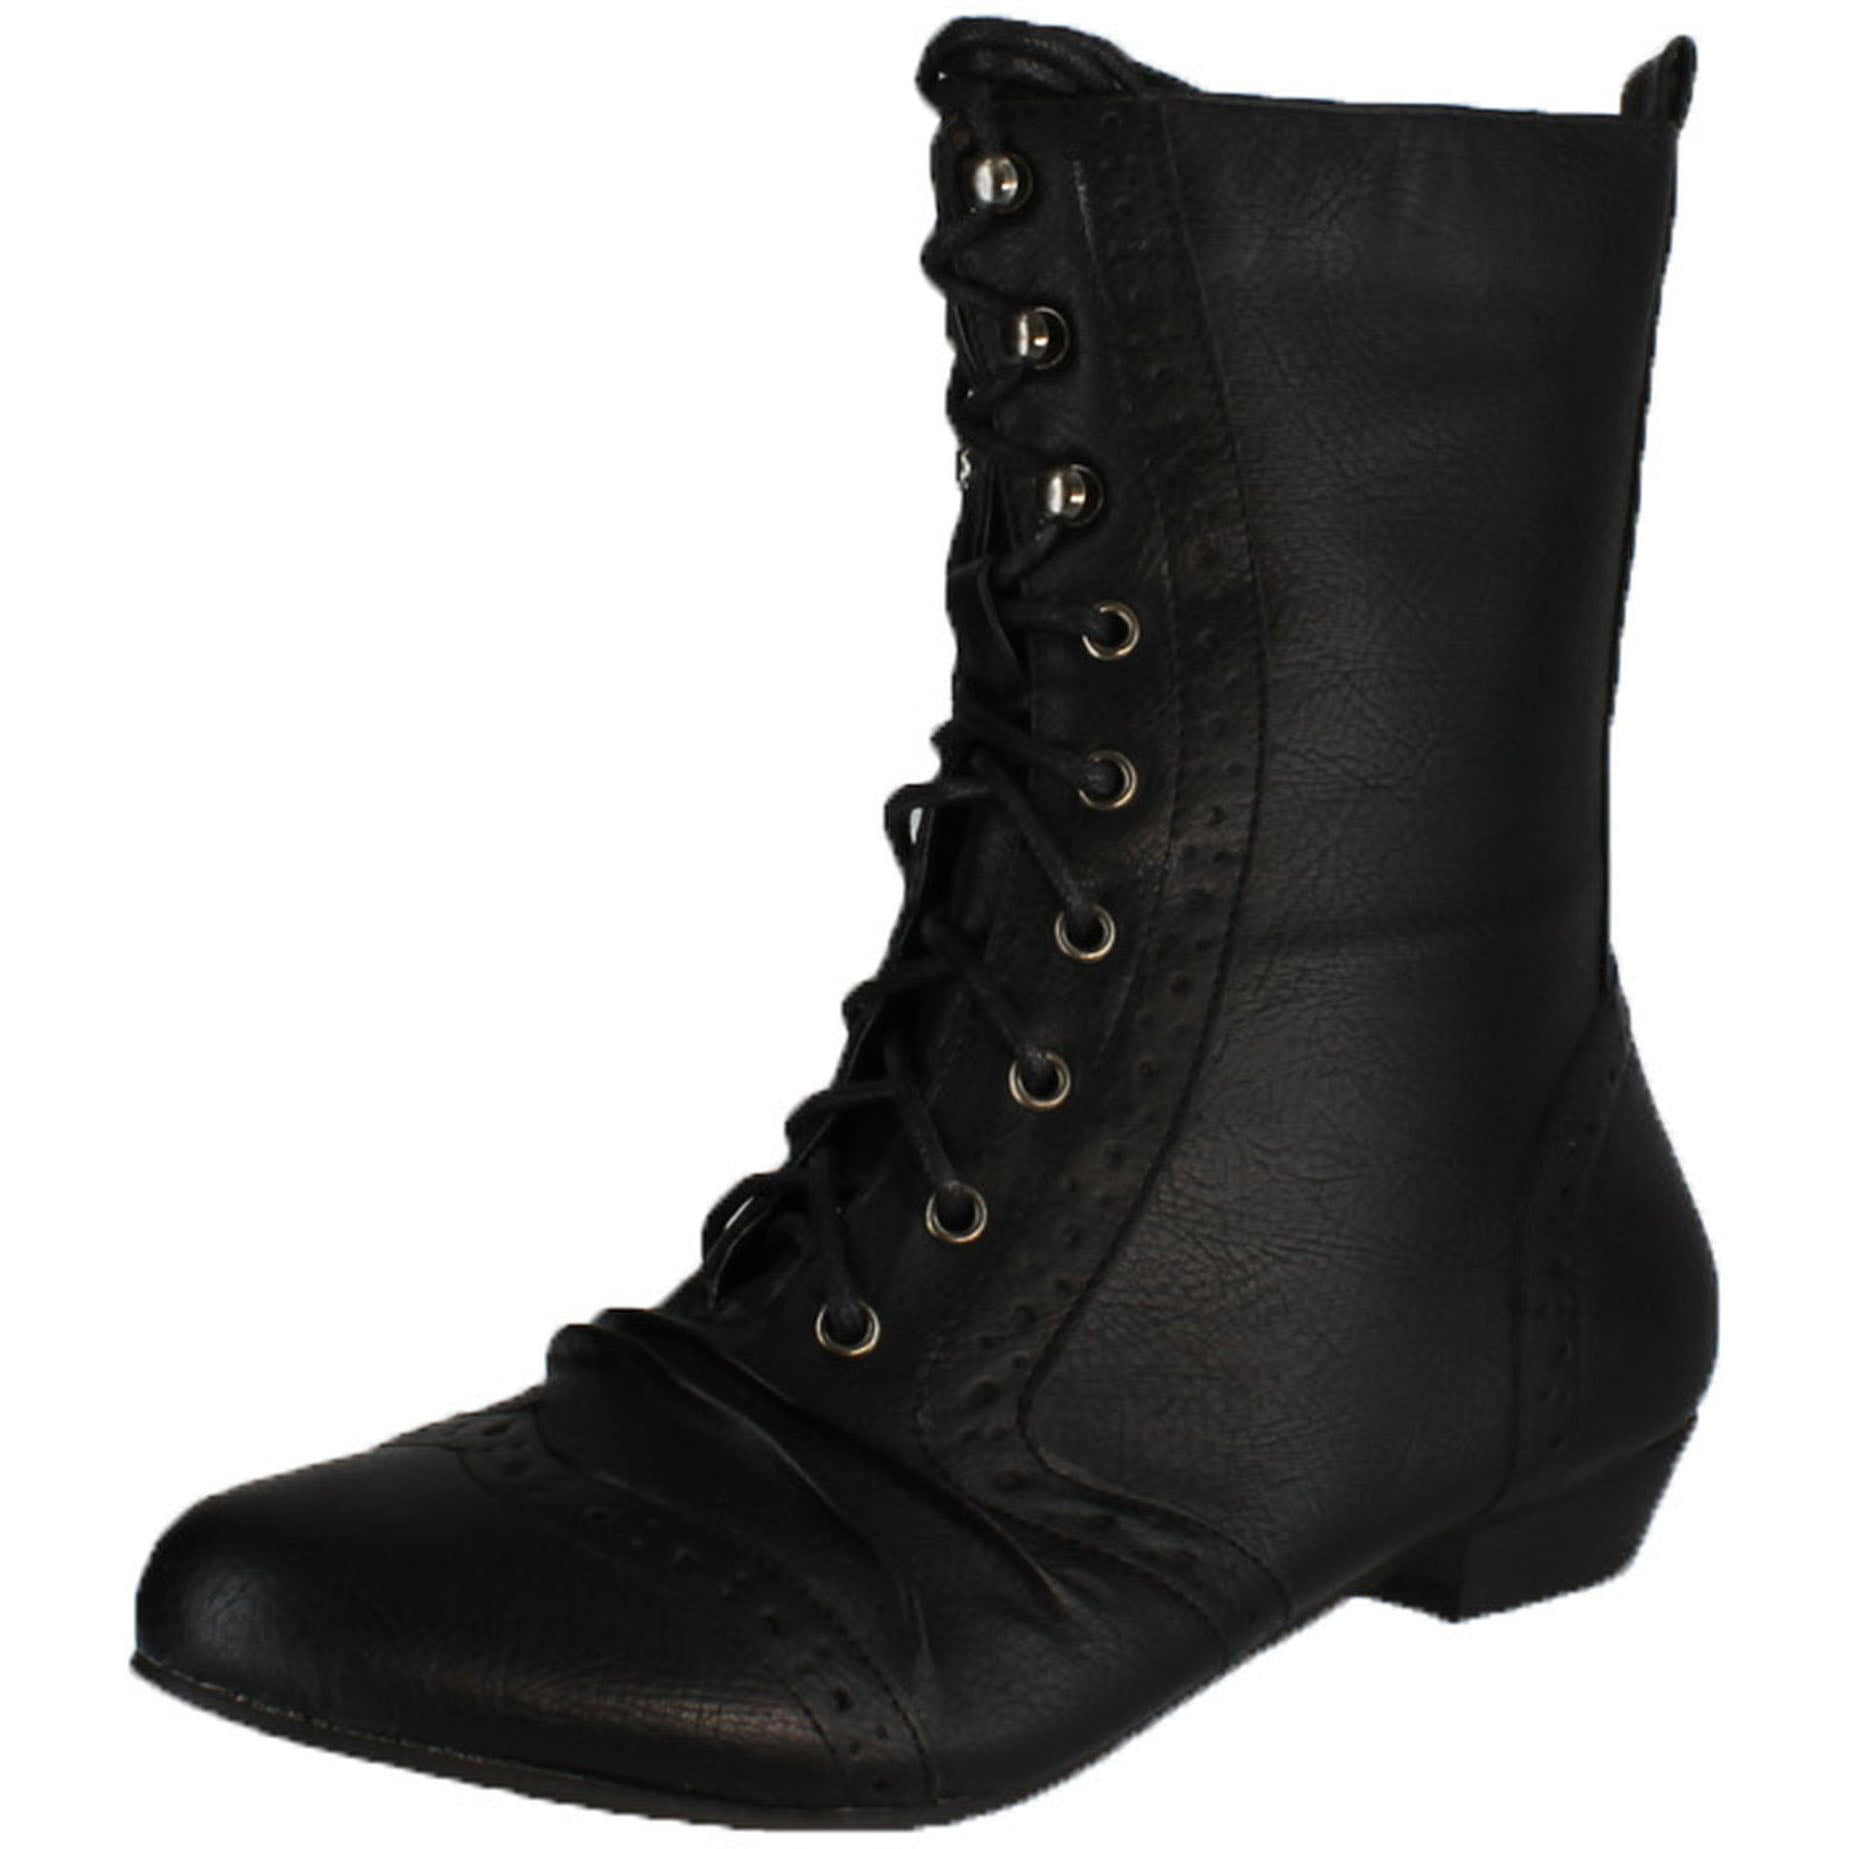 Refresh Lee-01 Women's Mid Calf Combat Boots on Oxford Structure, Black ...